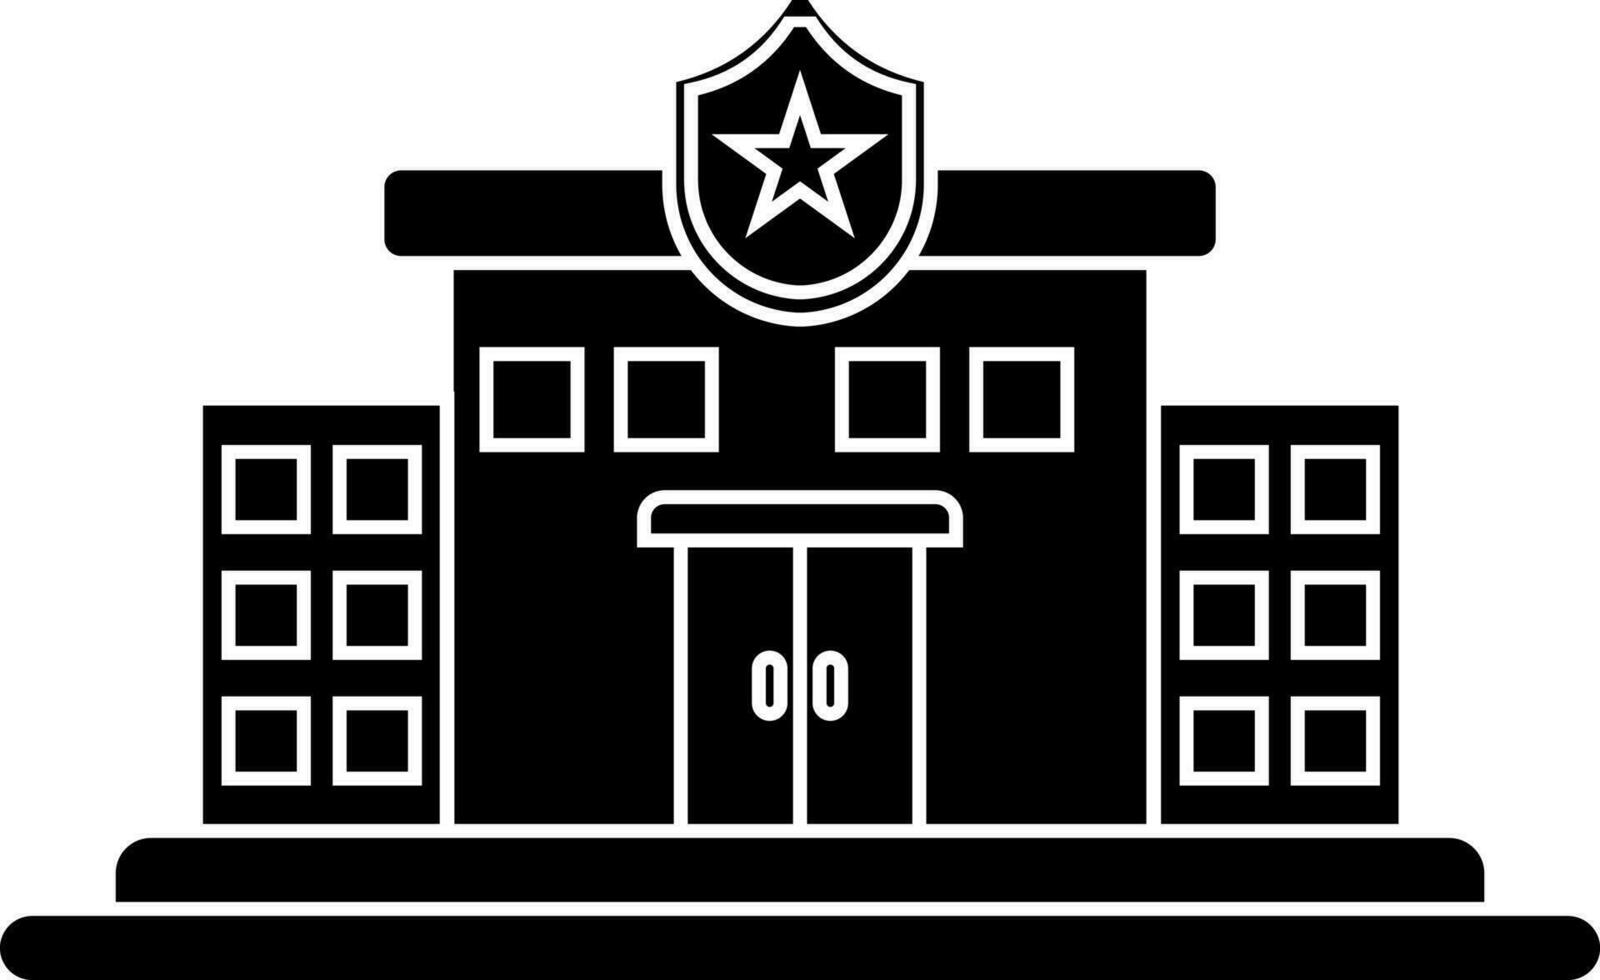 Black and White police station icon in flat style. vector